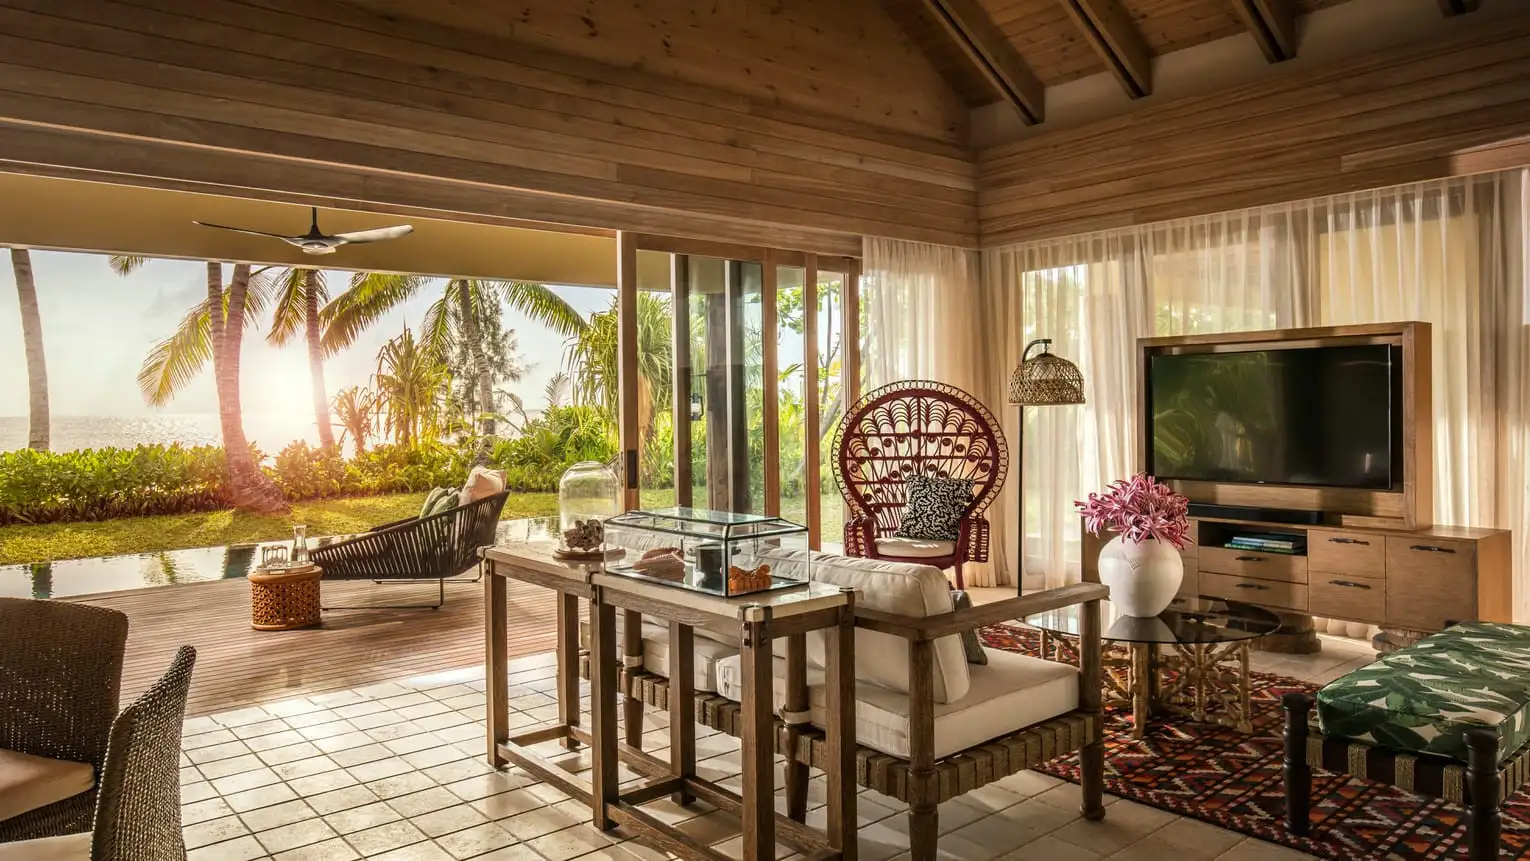 Indulge in the allure of our intimate rustic villas and suites, each serving as a private retreat that will transport you into the enchanting world of a fortunate castaway here at Four Seasons Resort at Desroches Island.